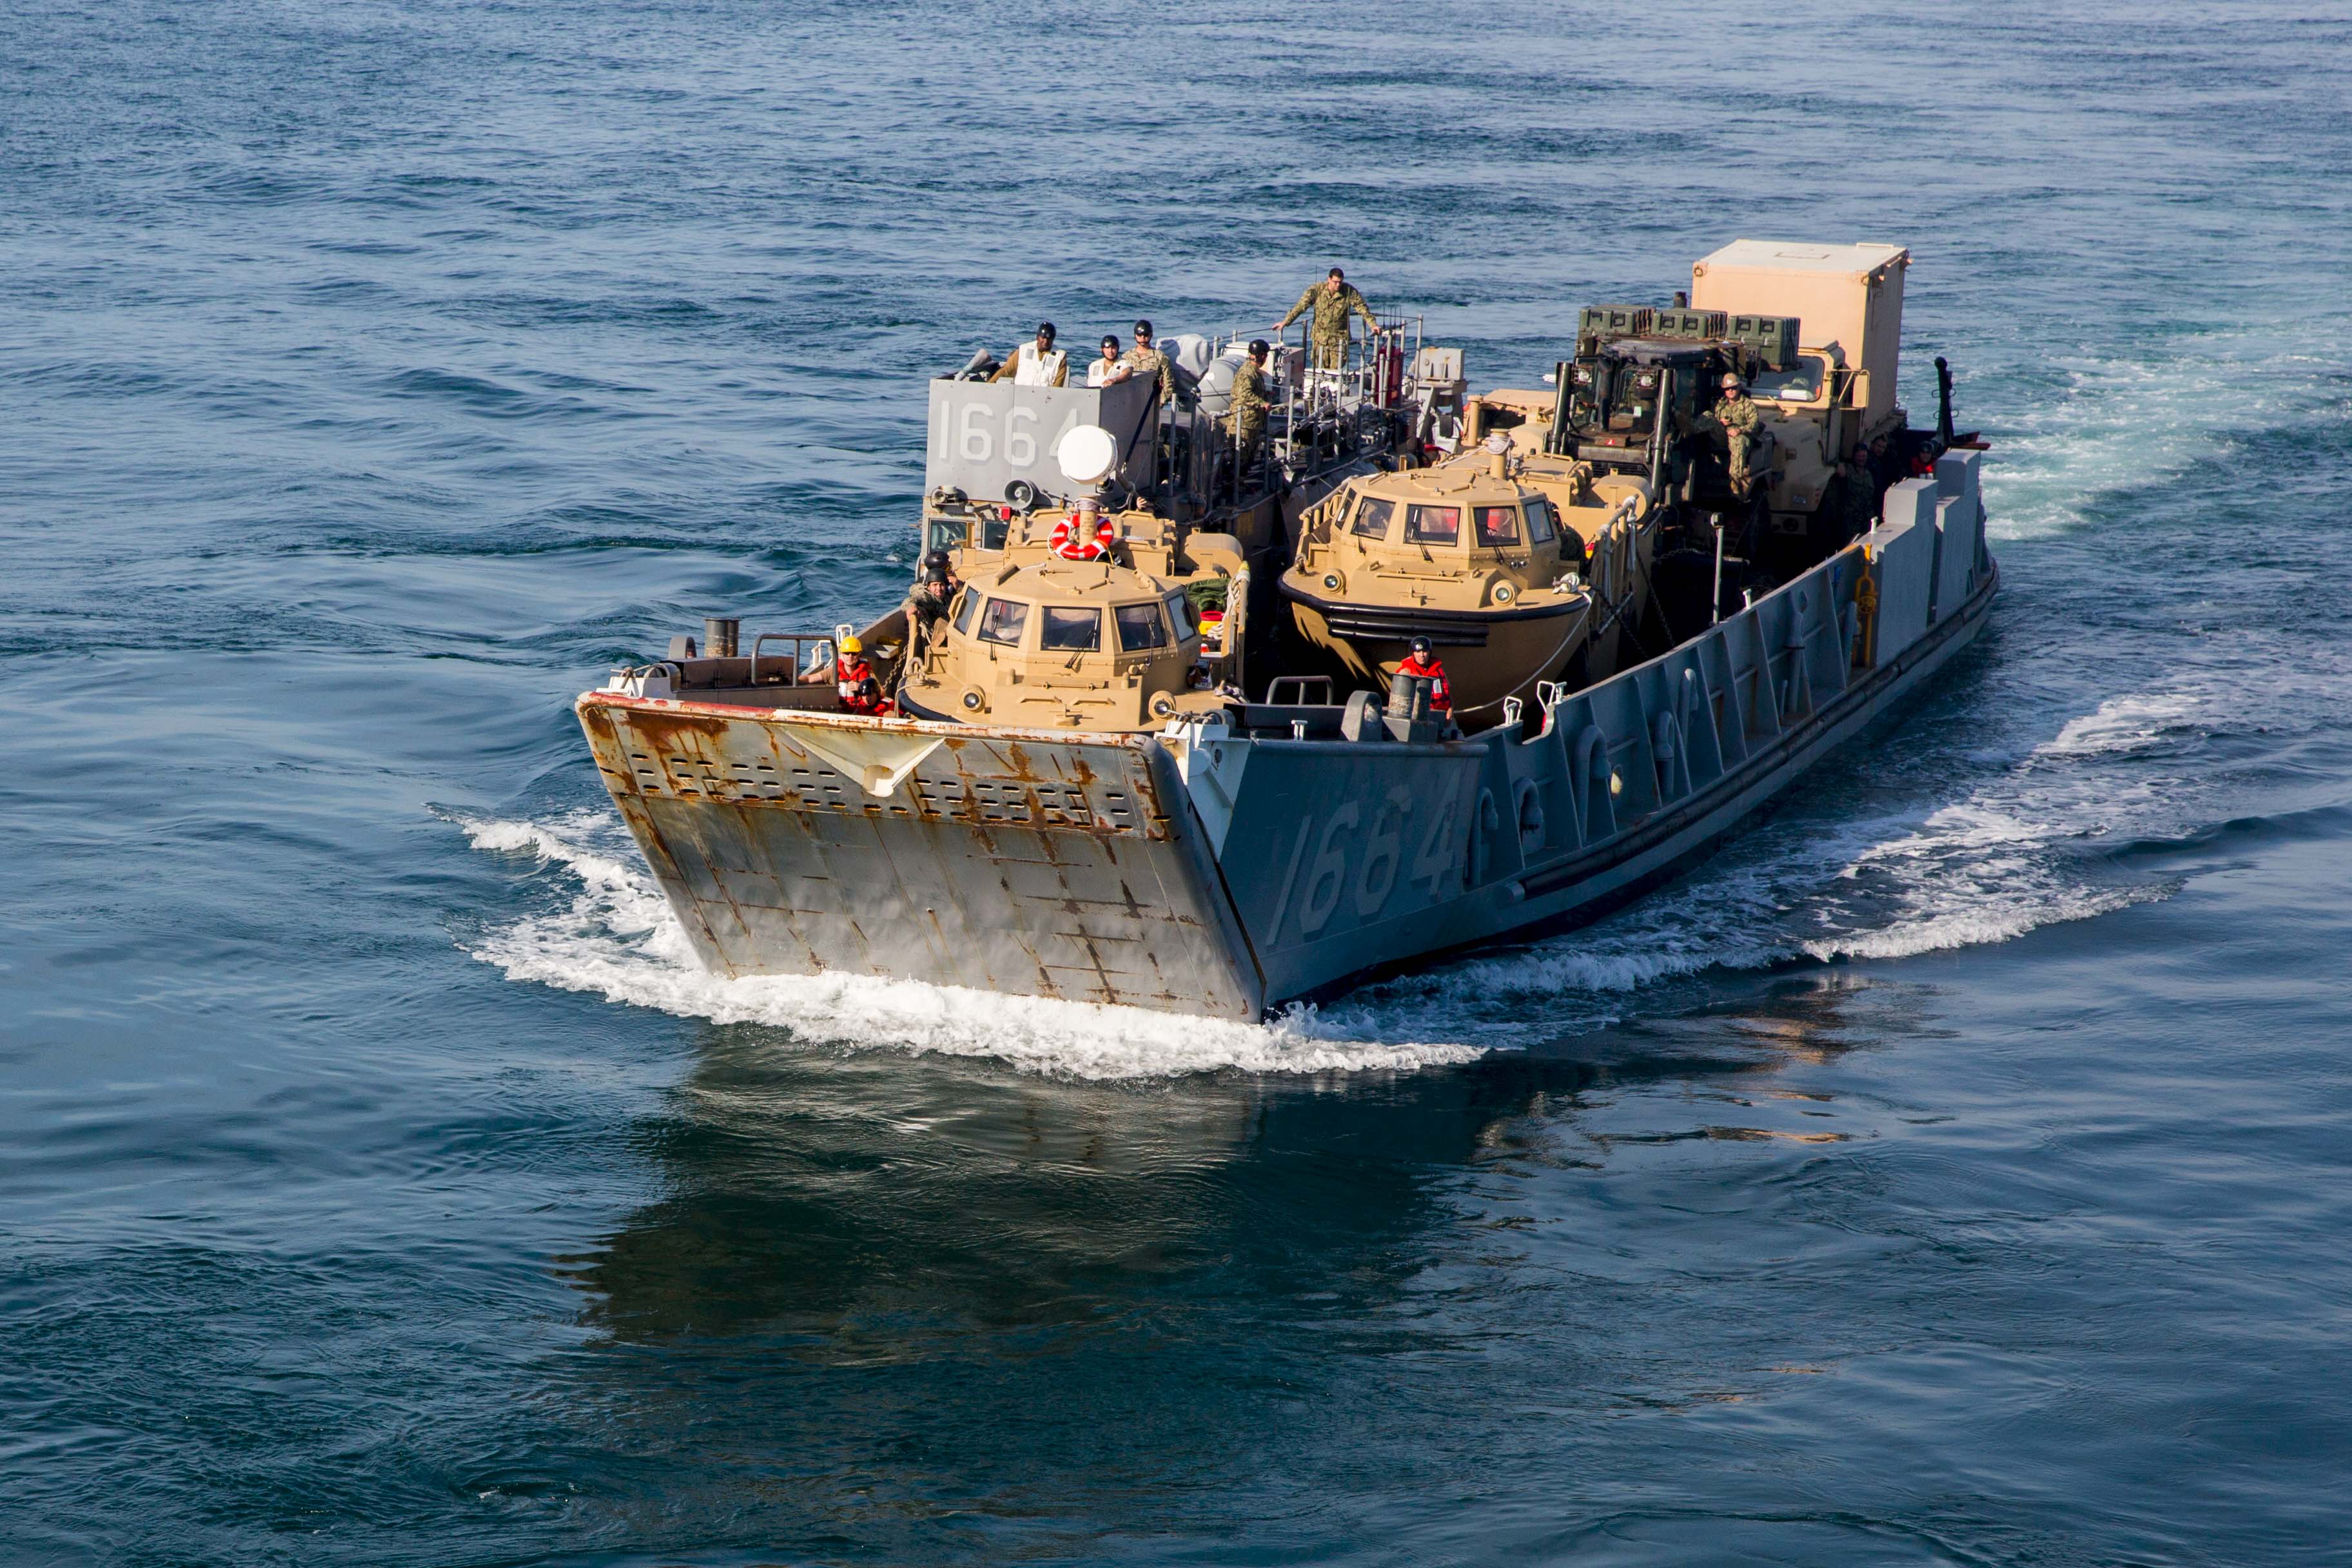 A Landing Craft Utility (LCU) 1664 approaches the amphibious assault ship USS Kearsarge (LHD 3) during a September 2015 exercise. US Navy photo.